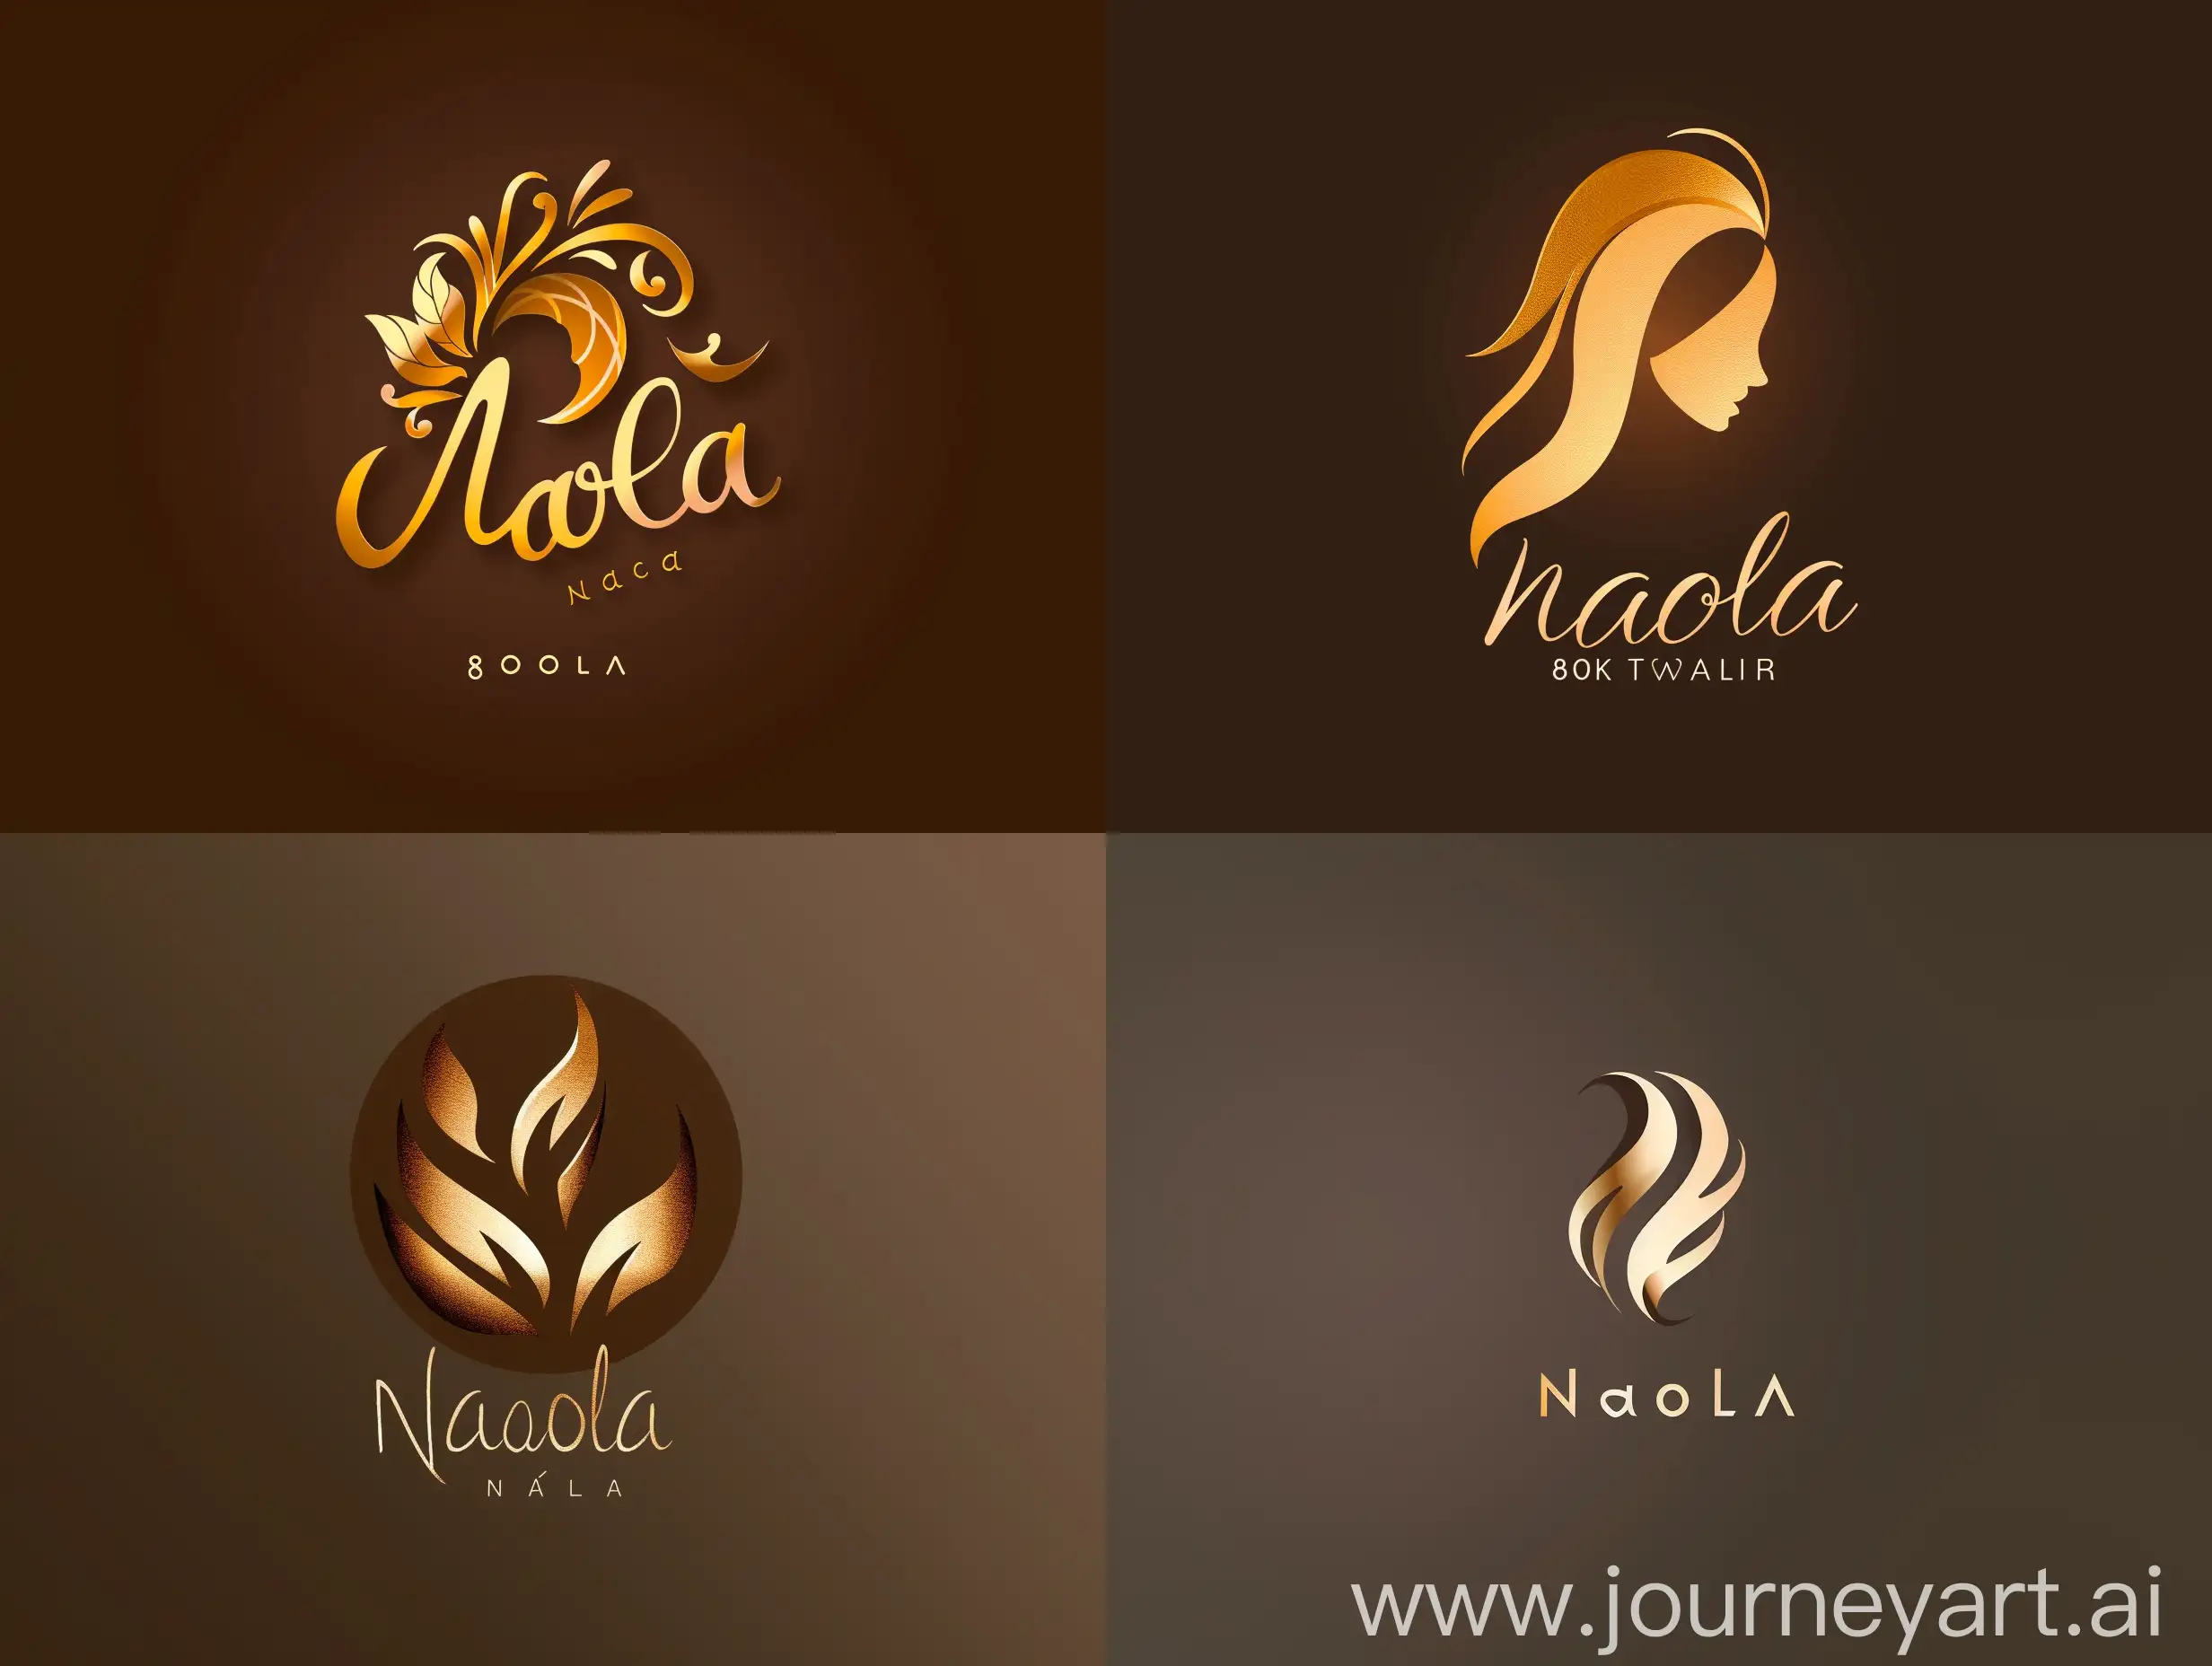 a high-quality logo designed for the leather goods workshop. Contains the colors #b97c11 for deep and rich gold and #b96011 for a bright and refreshing skin color. the name "Naola" is present near the logo. 8k